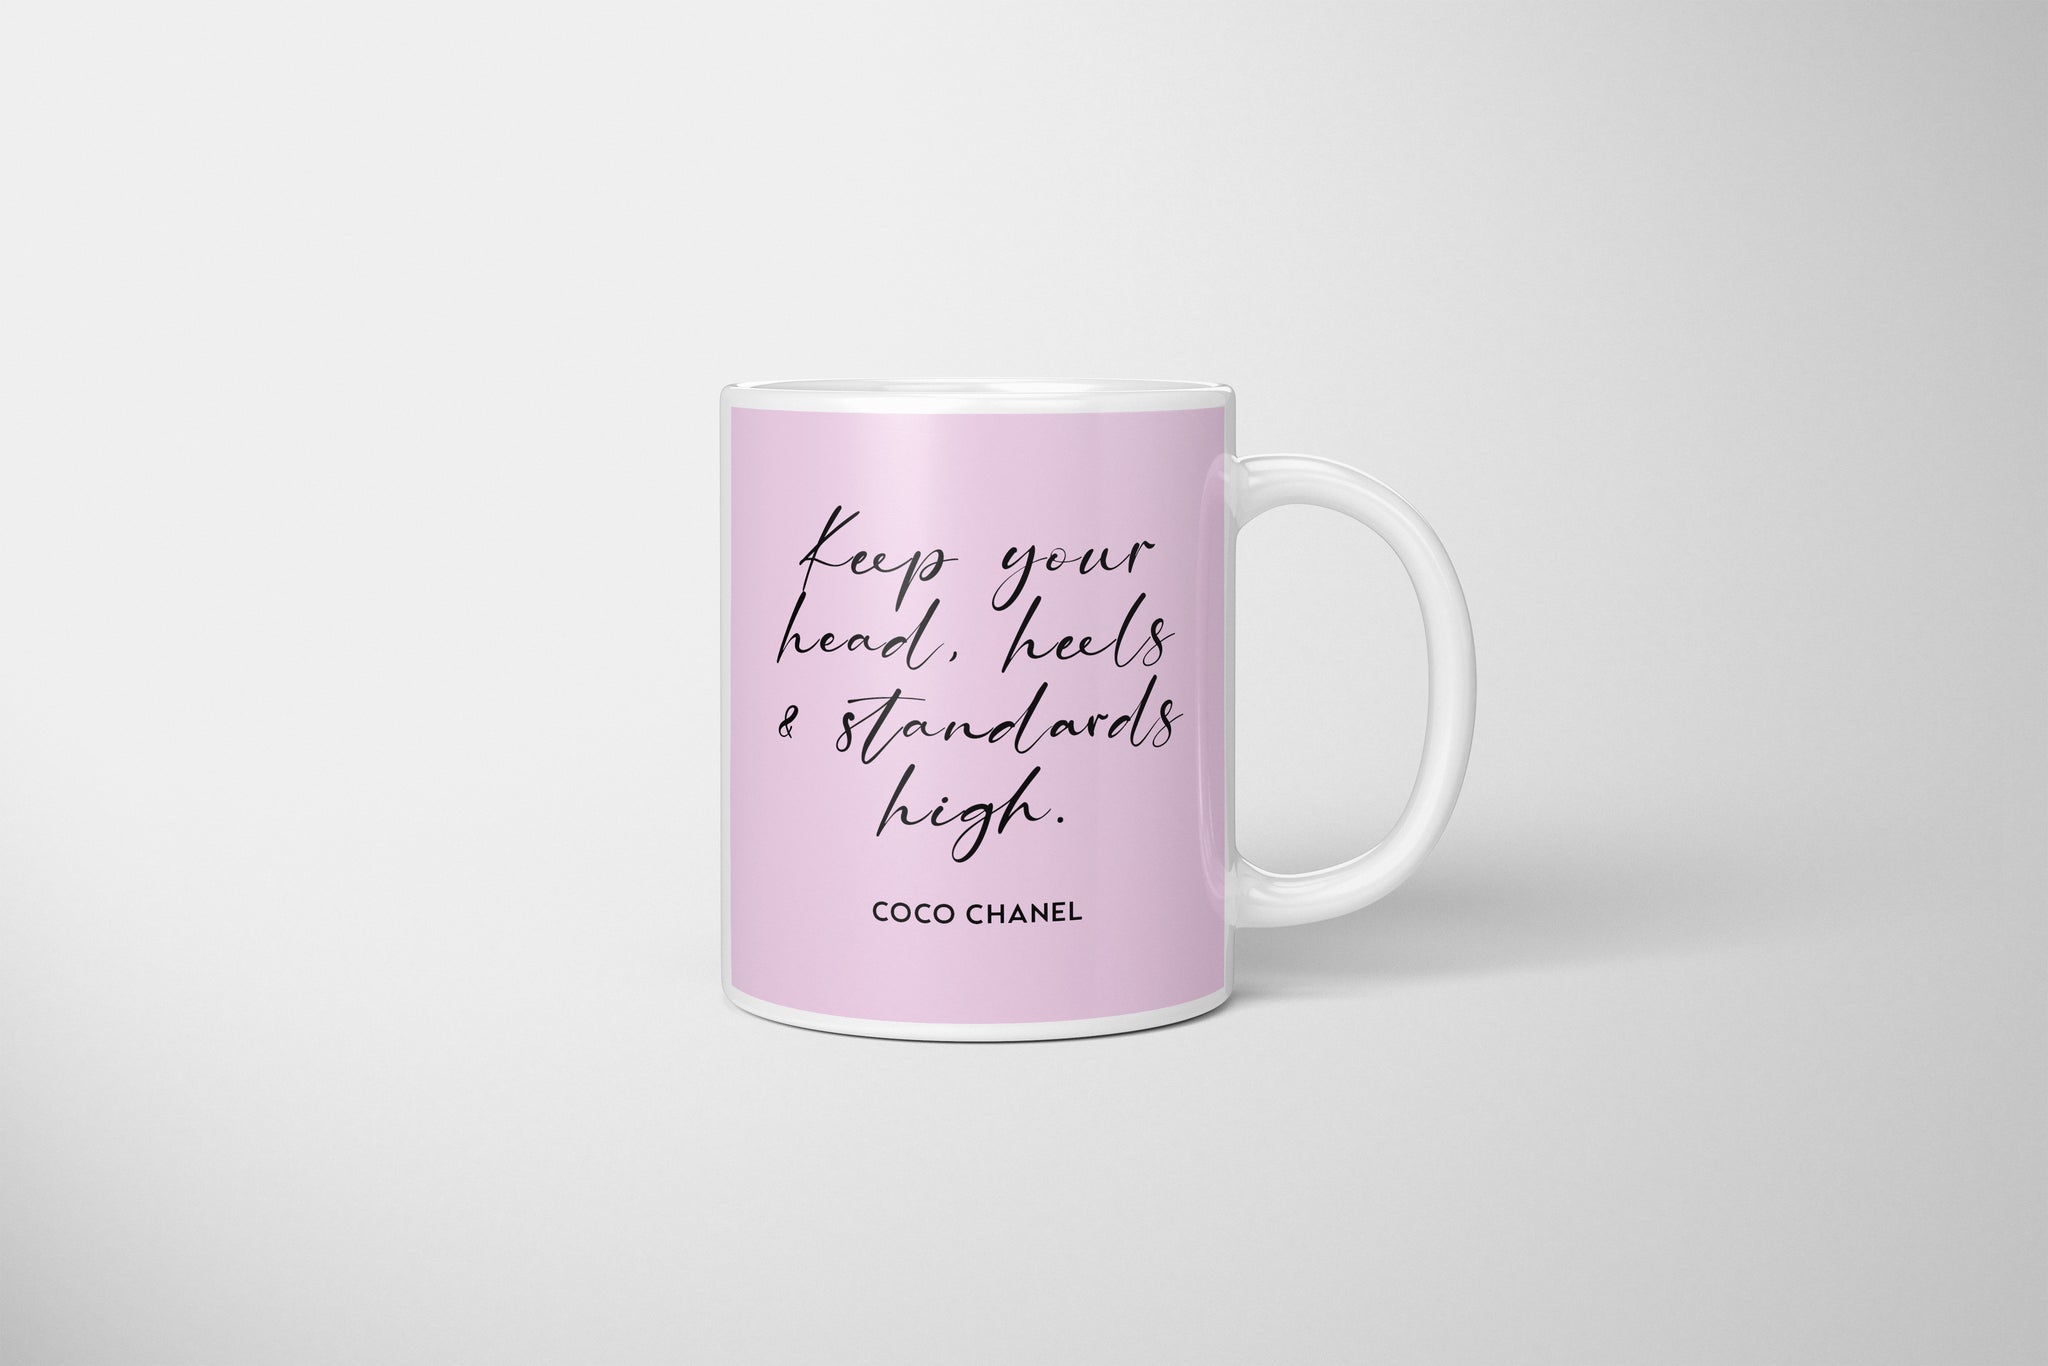 Coco Chanel Mug, Coco Chanel Quotes Mug, Head & Heels, Classy & Fabulous, Coco Chanel Gift, A Girl Should Be Two Things Classy And Fabulous, Keep Your Head, Heels & Standards High Mug, Beauty Begins The Moment You Decide To Be Yourself, Coco Chanel UK Mug